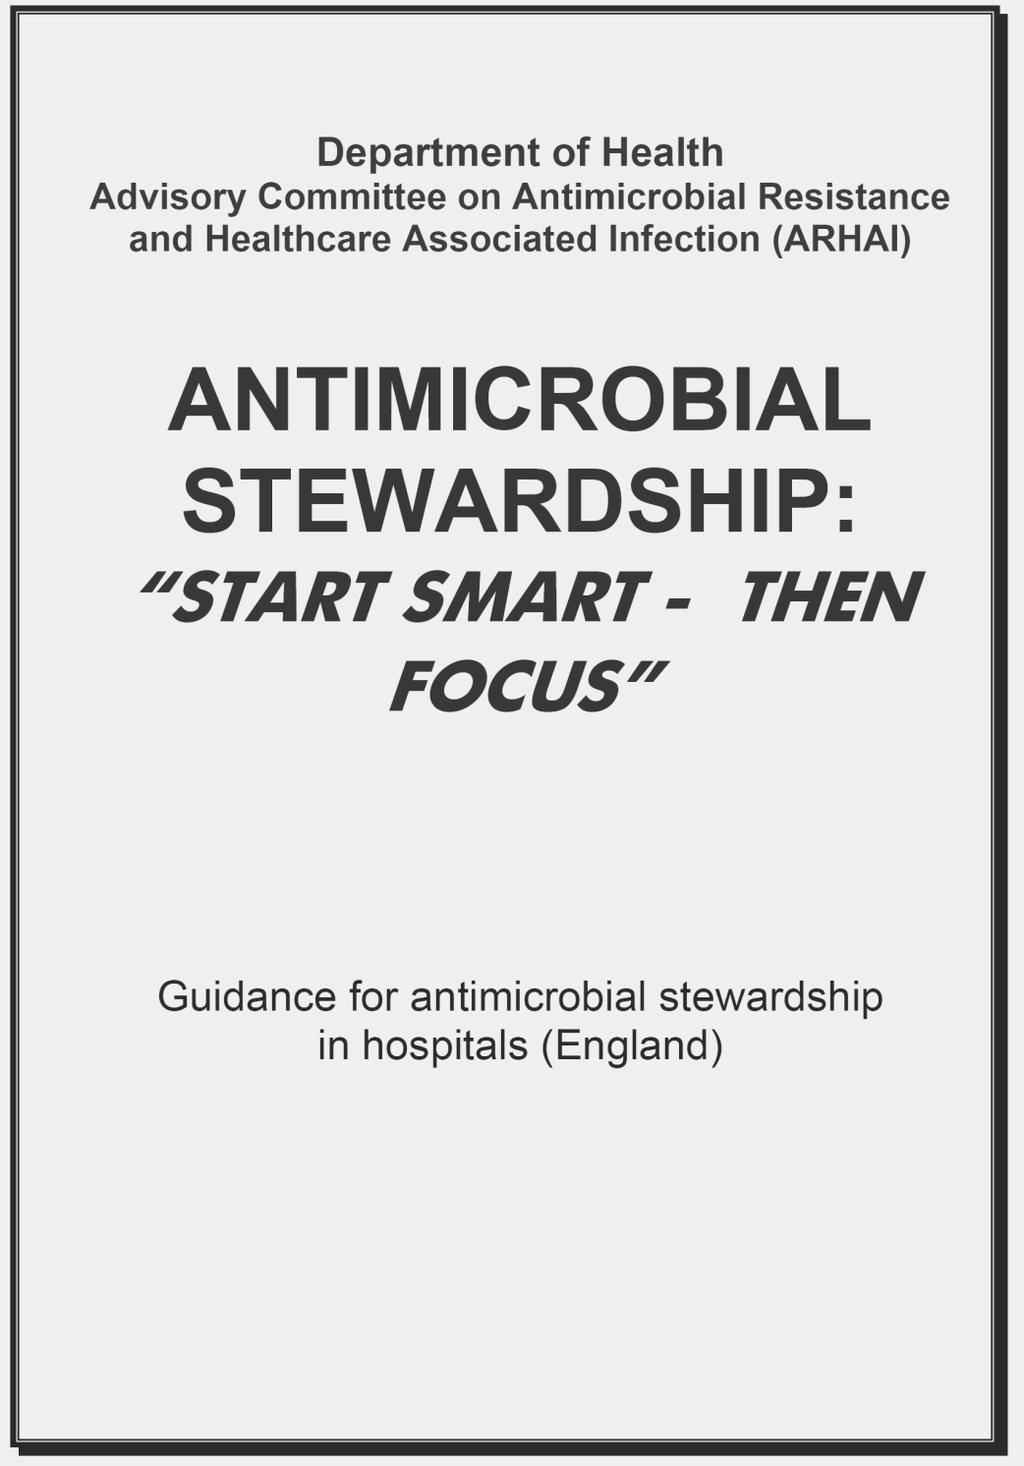 The recommended key roles of the Antimicrobial Stewardship Management Team/Committee are to: Ensure that evidence-based local antimicrobial guidelines are in place and reviewed regularly Ensure